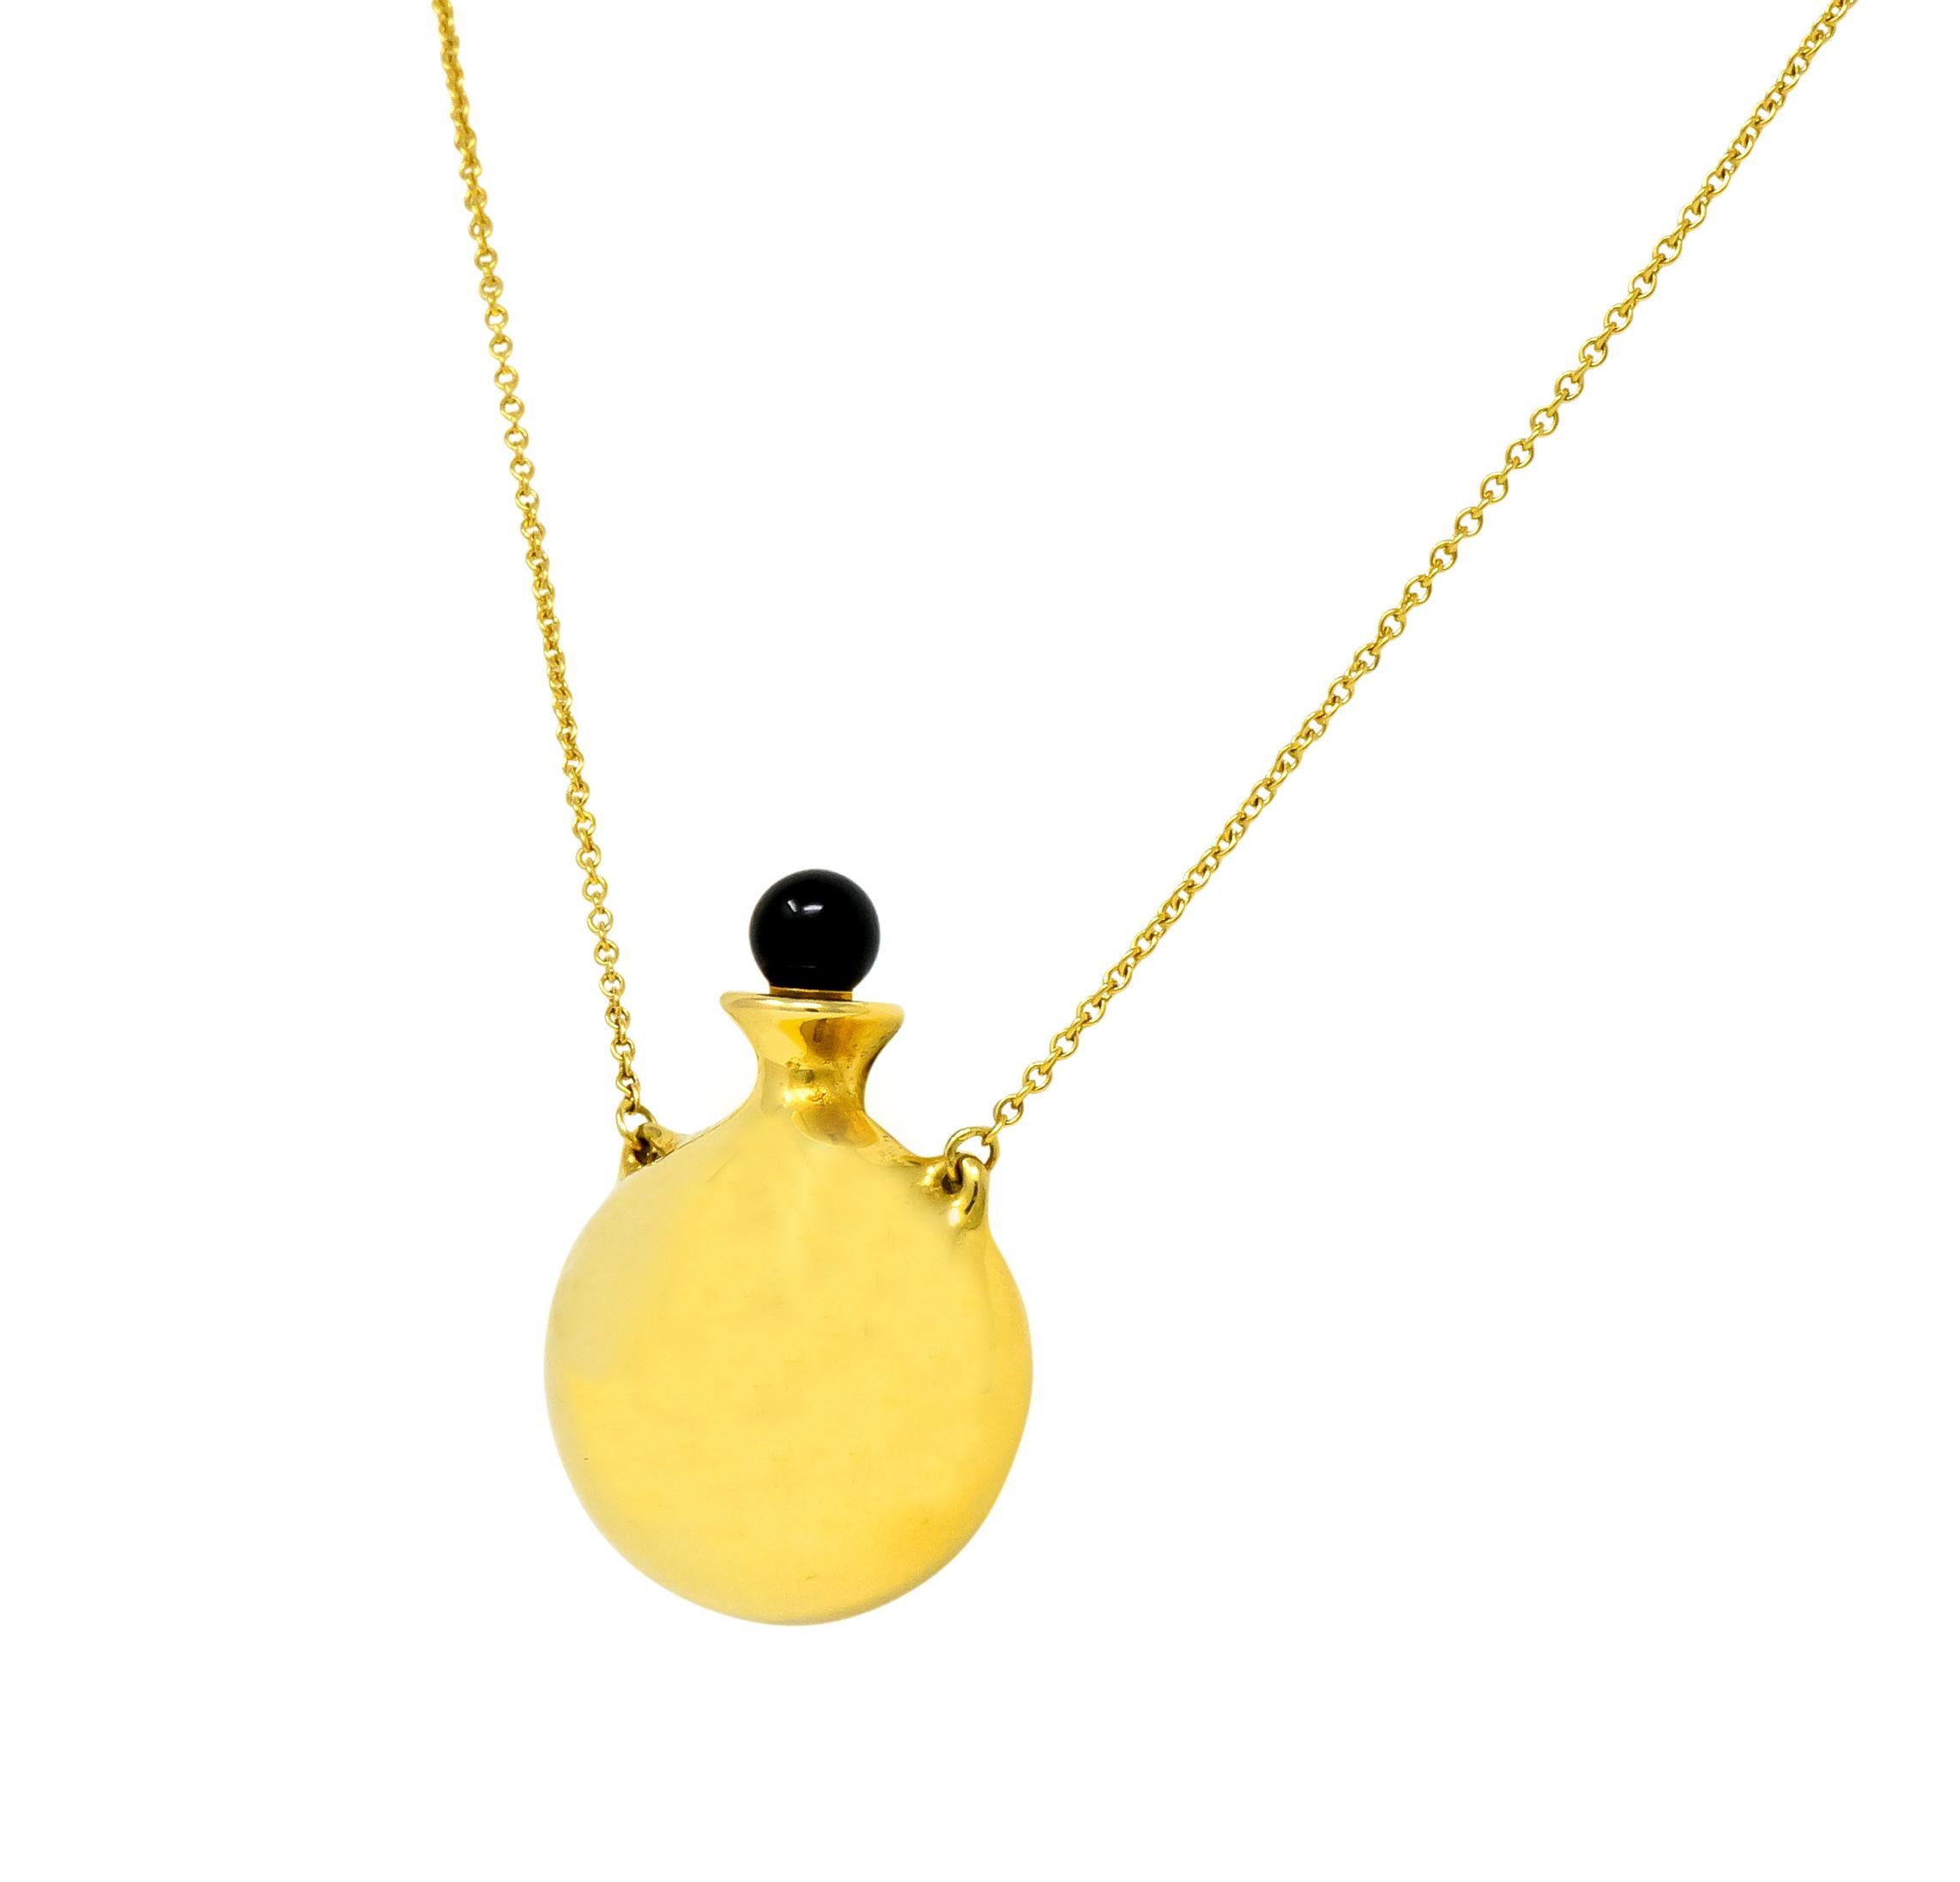 Featuring a realistic stylized rounded bottle pendant in high polished 18k gold with round black jade orb on stopper

Stopper has 'wand' for applying perfume

Completed with cable chain and spring ring clasp

Fully signed Tiffany & Co., Elsa